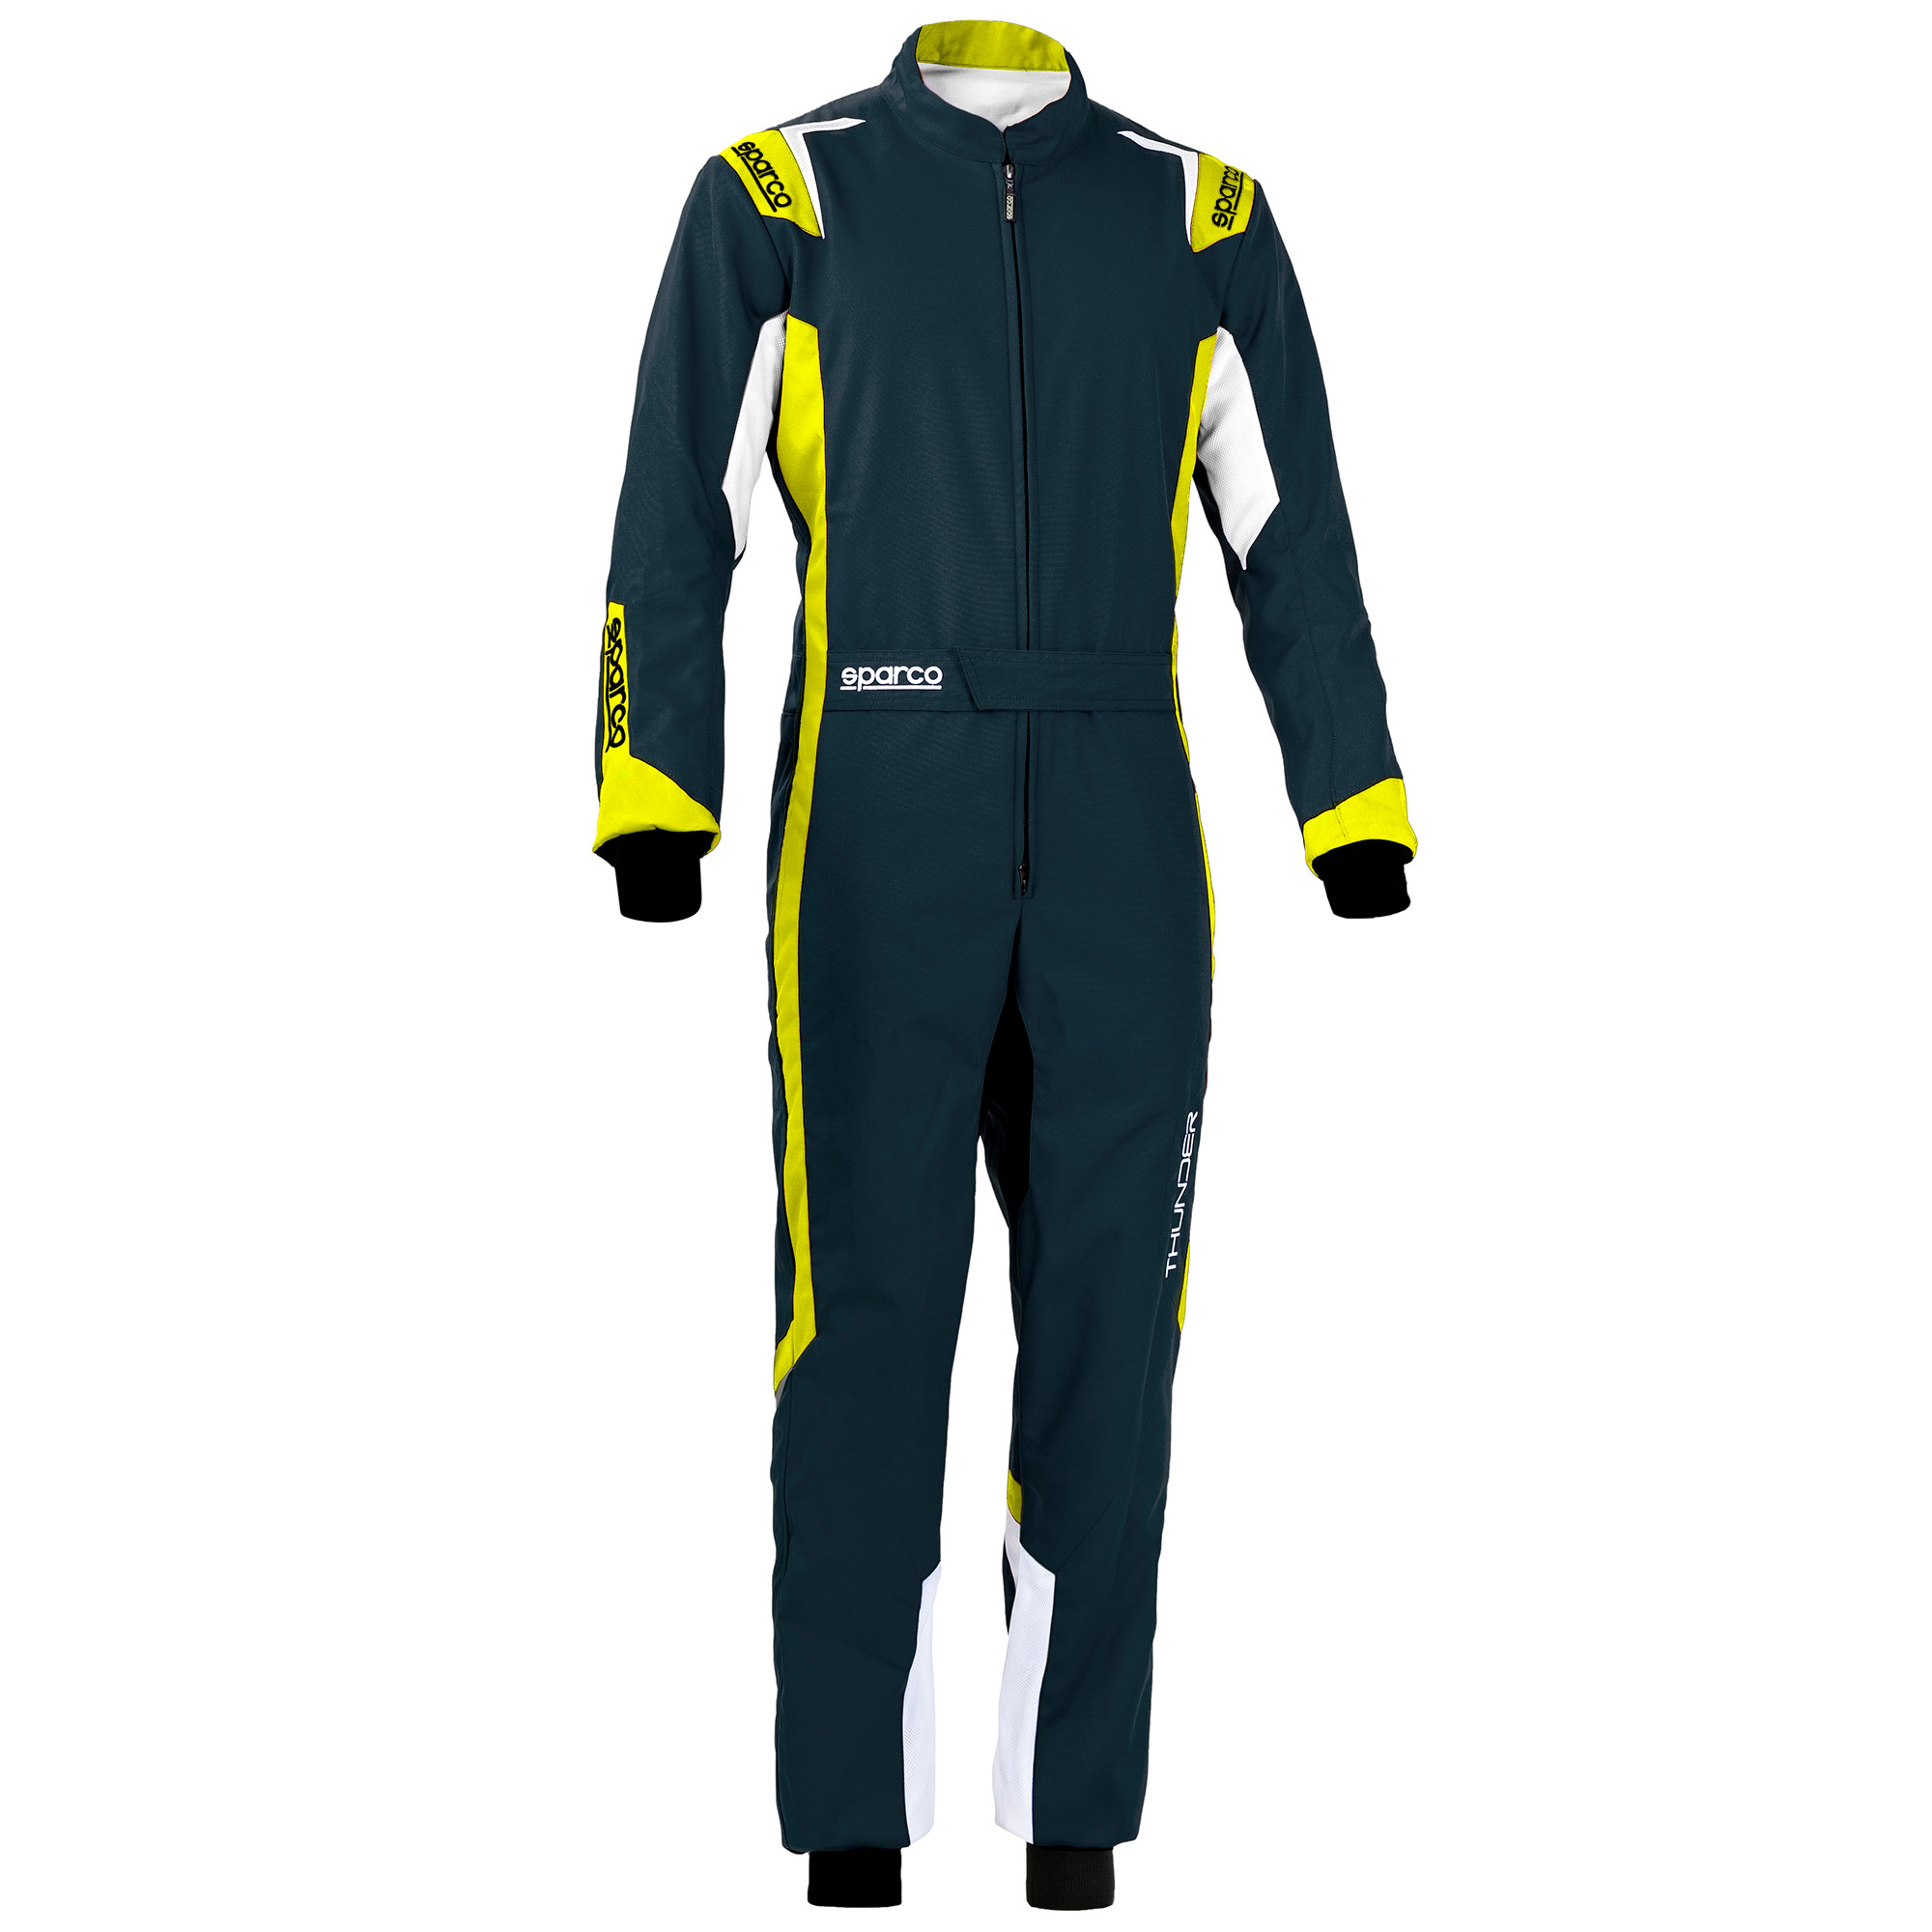 Cordura Double layer CIK-FIA Level 2 Approved Karting Racing Adult Suit New 